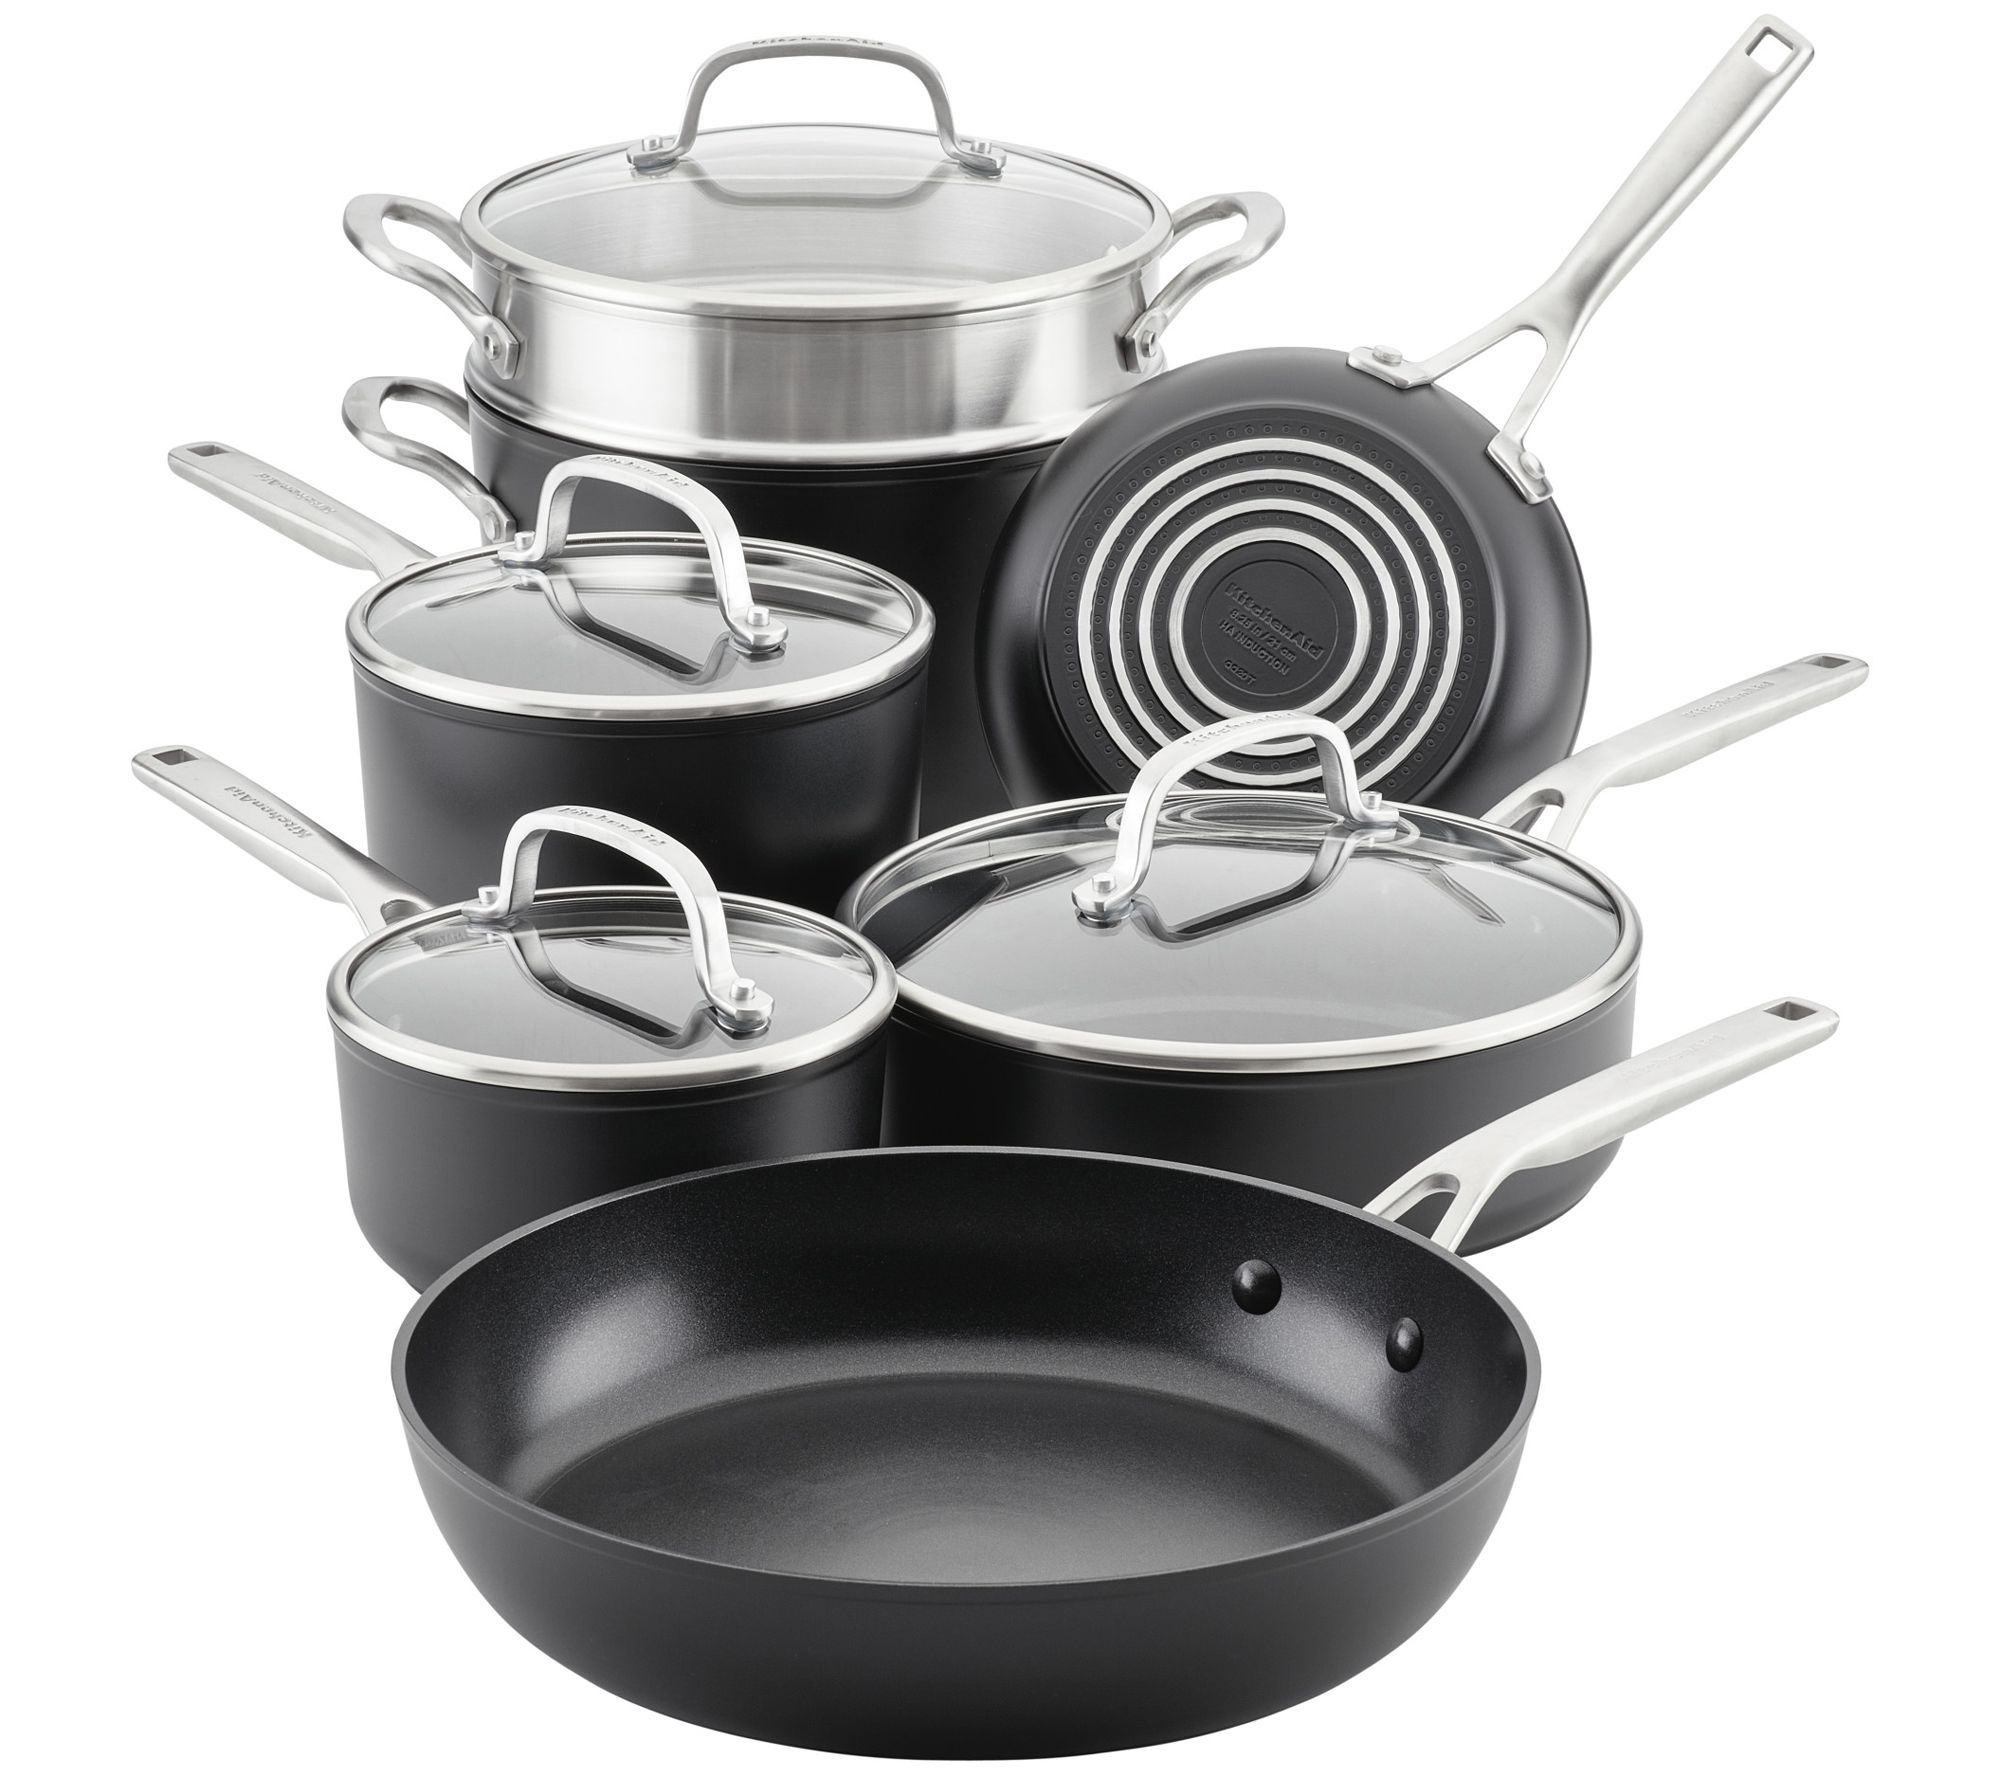 Chantal Induction 21 7 piece Stainless Steel Cookware